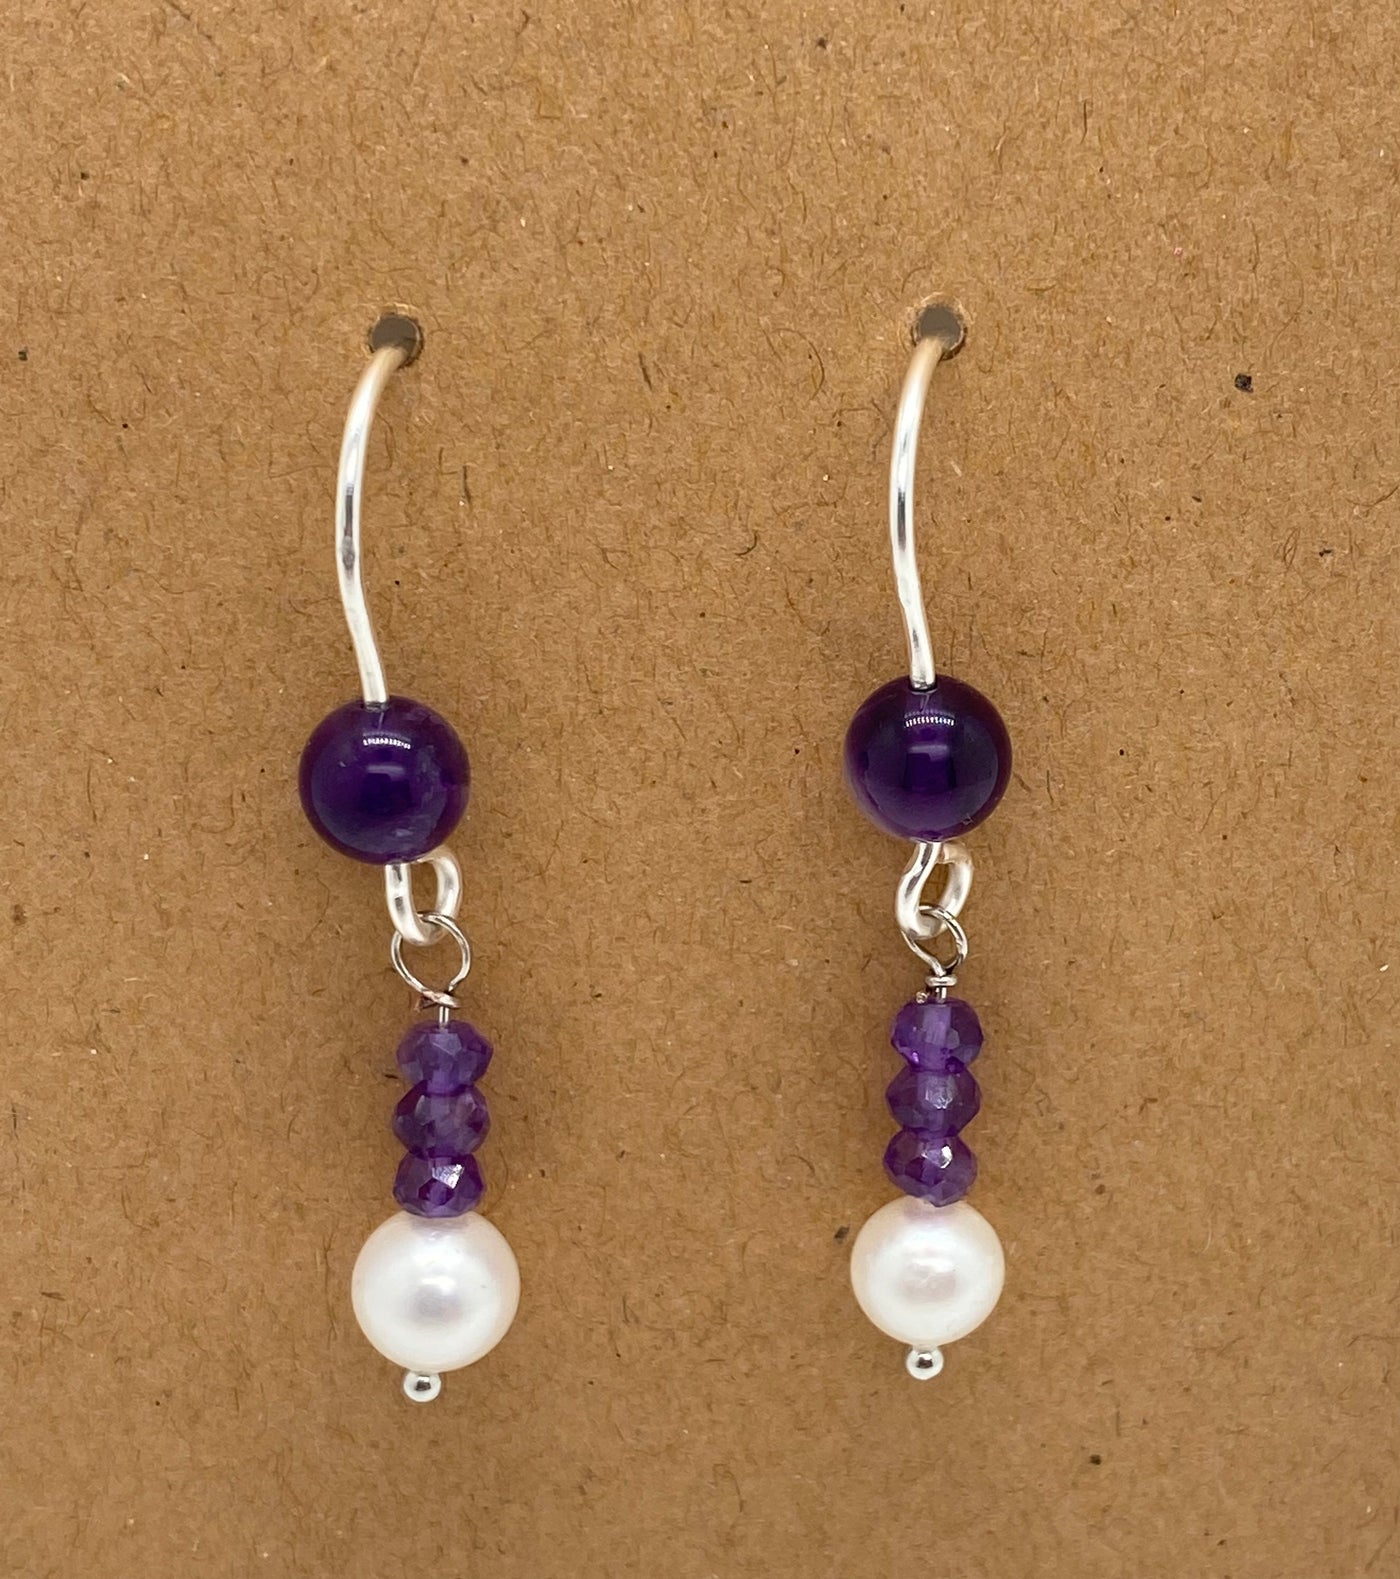 Pearls, amethists and silver earrings